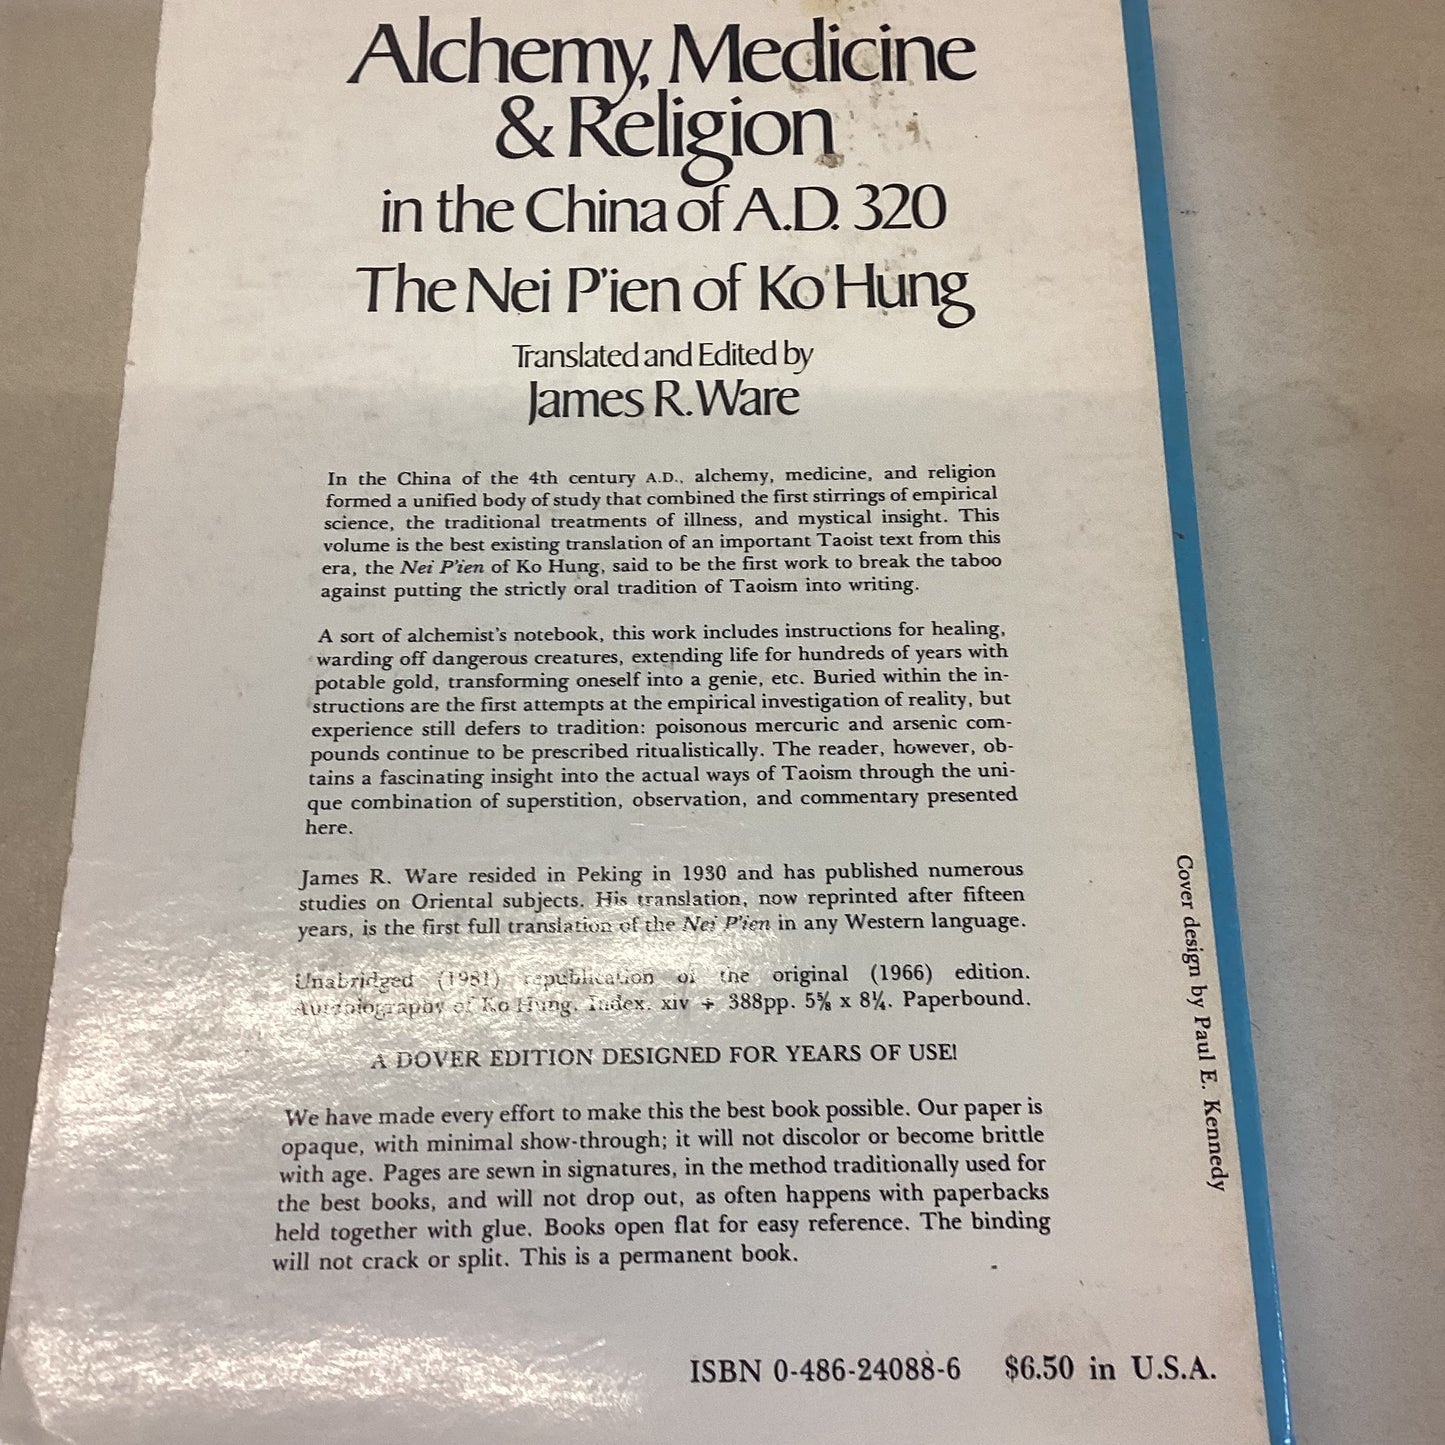 Alchemy, Medicine & Religion in The China of A.D. 320 The Nei P'ien of Ko Hung Translated and Edited by James R Ware